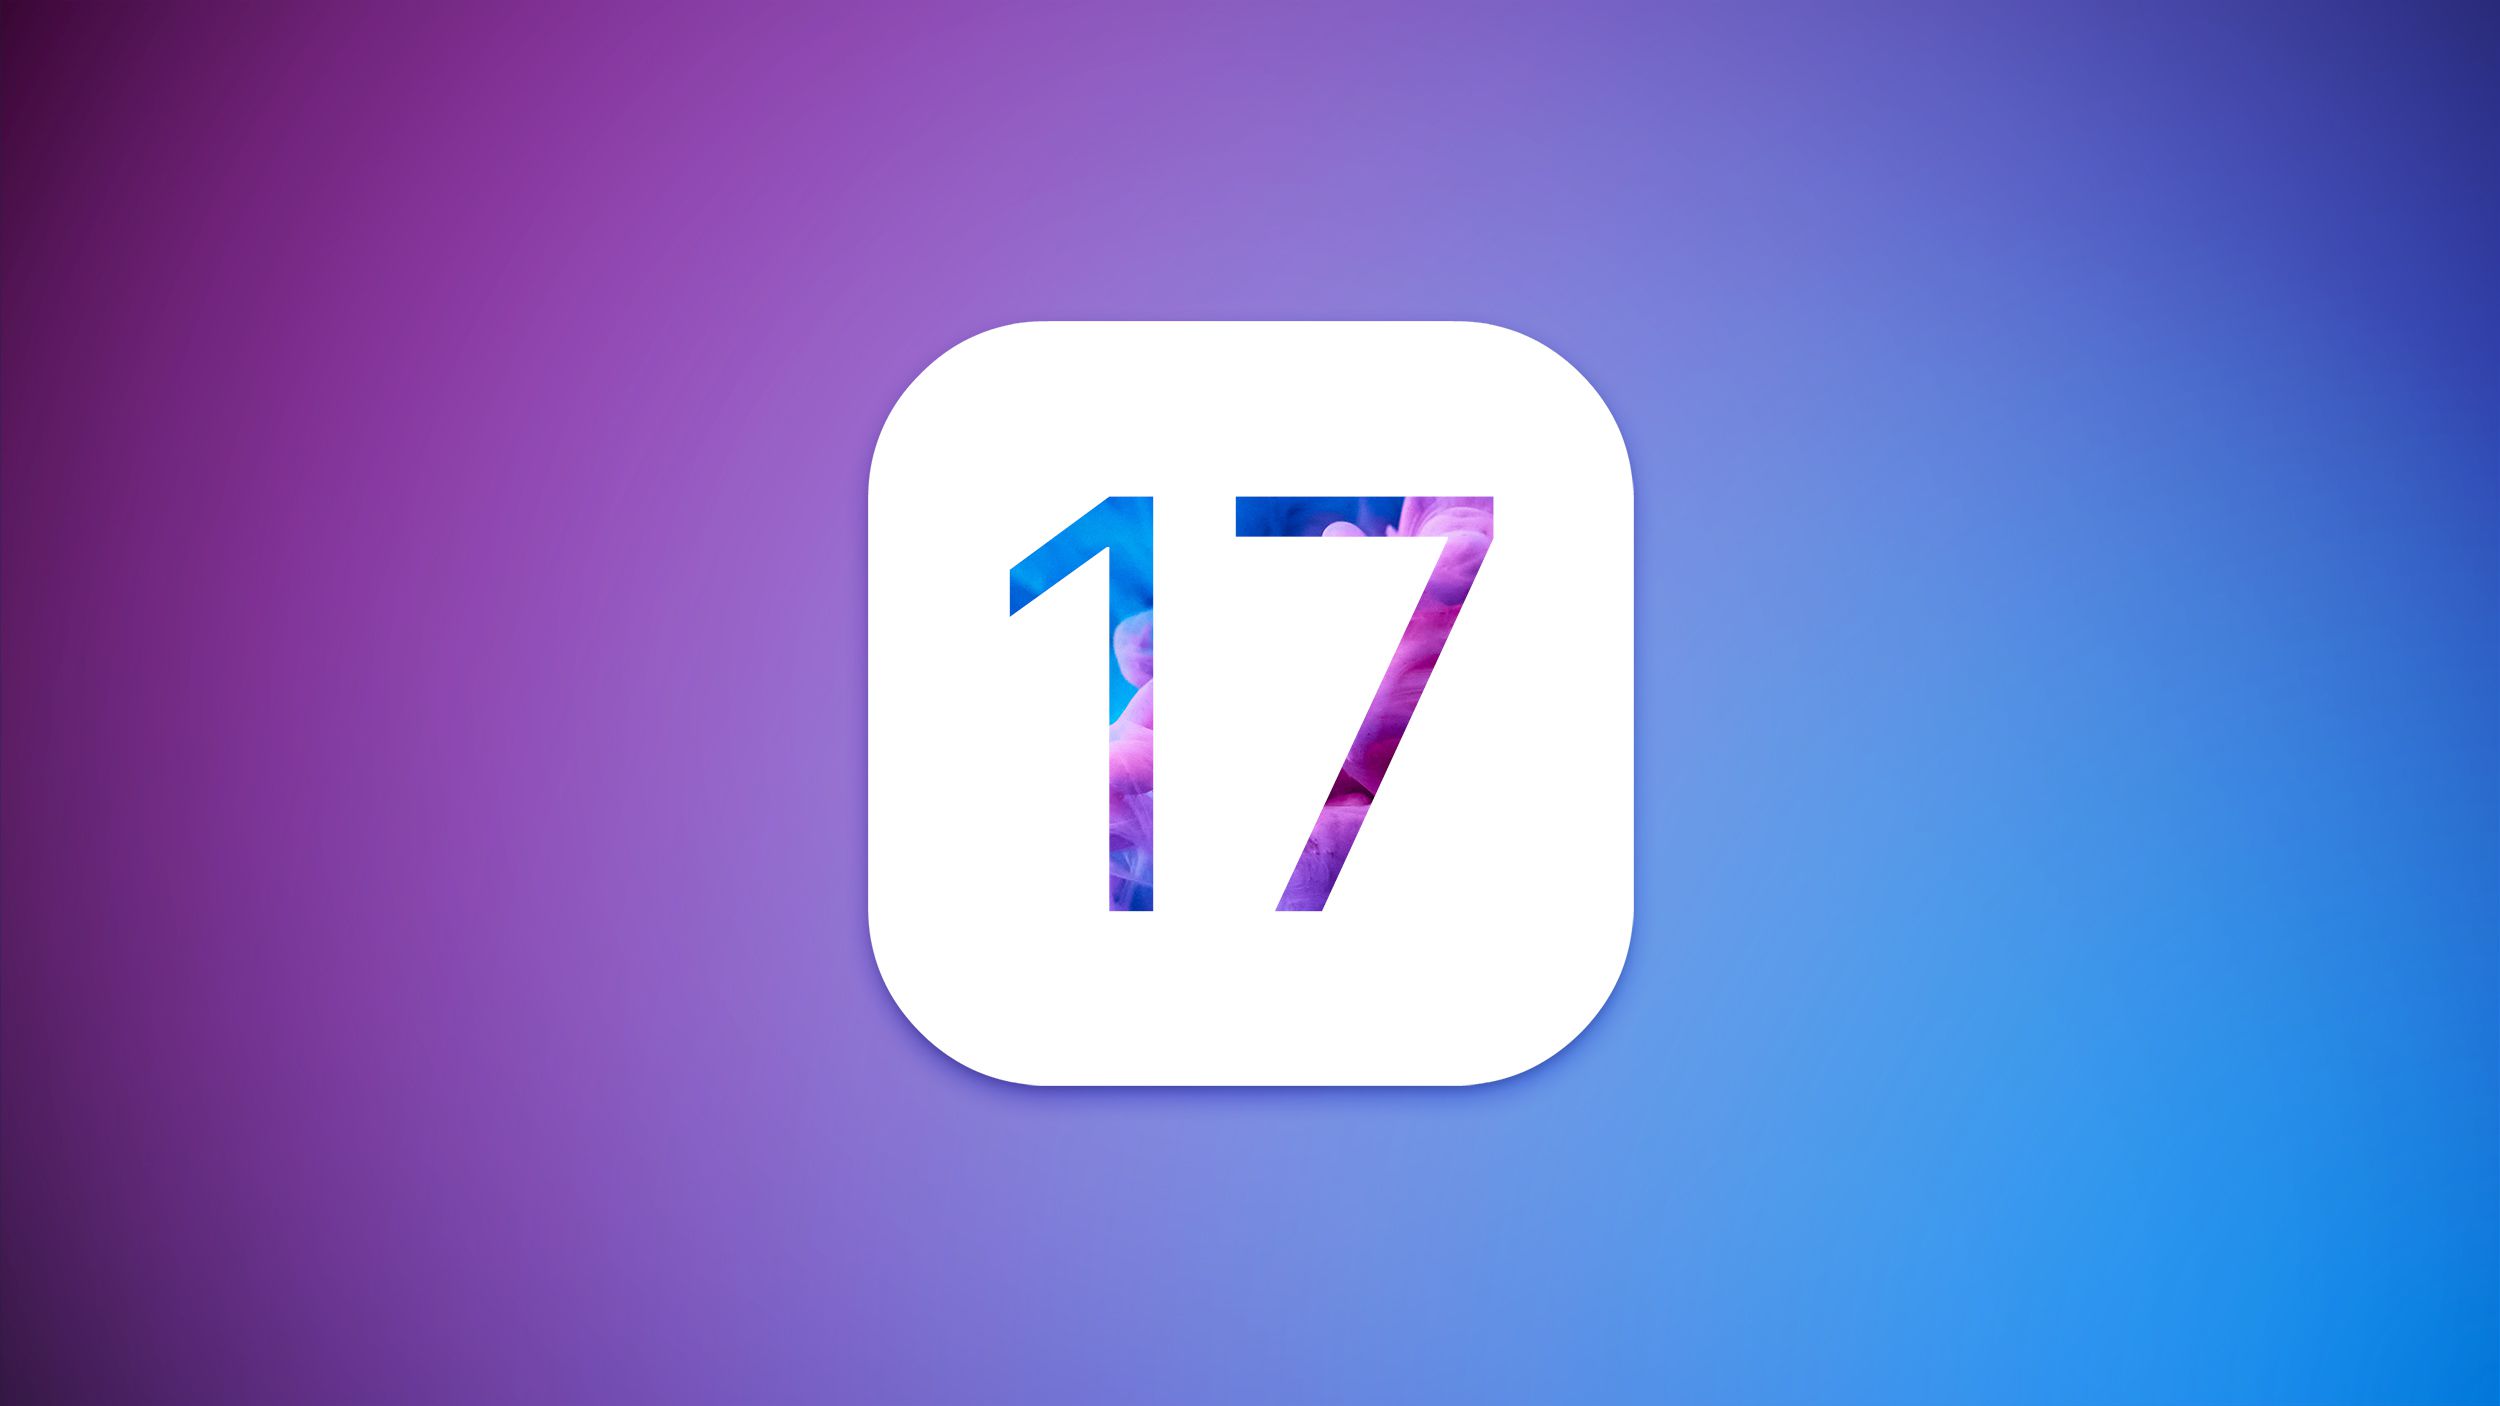 iOS 17 to Support App Sideloading to Comply With European Regulations